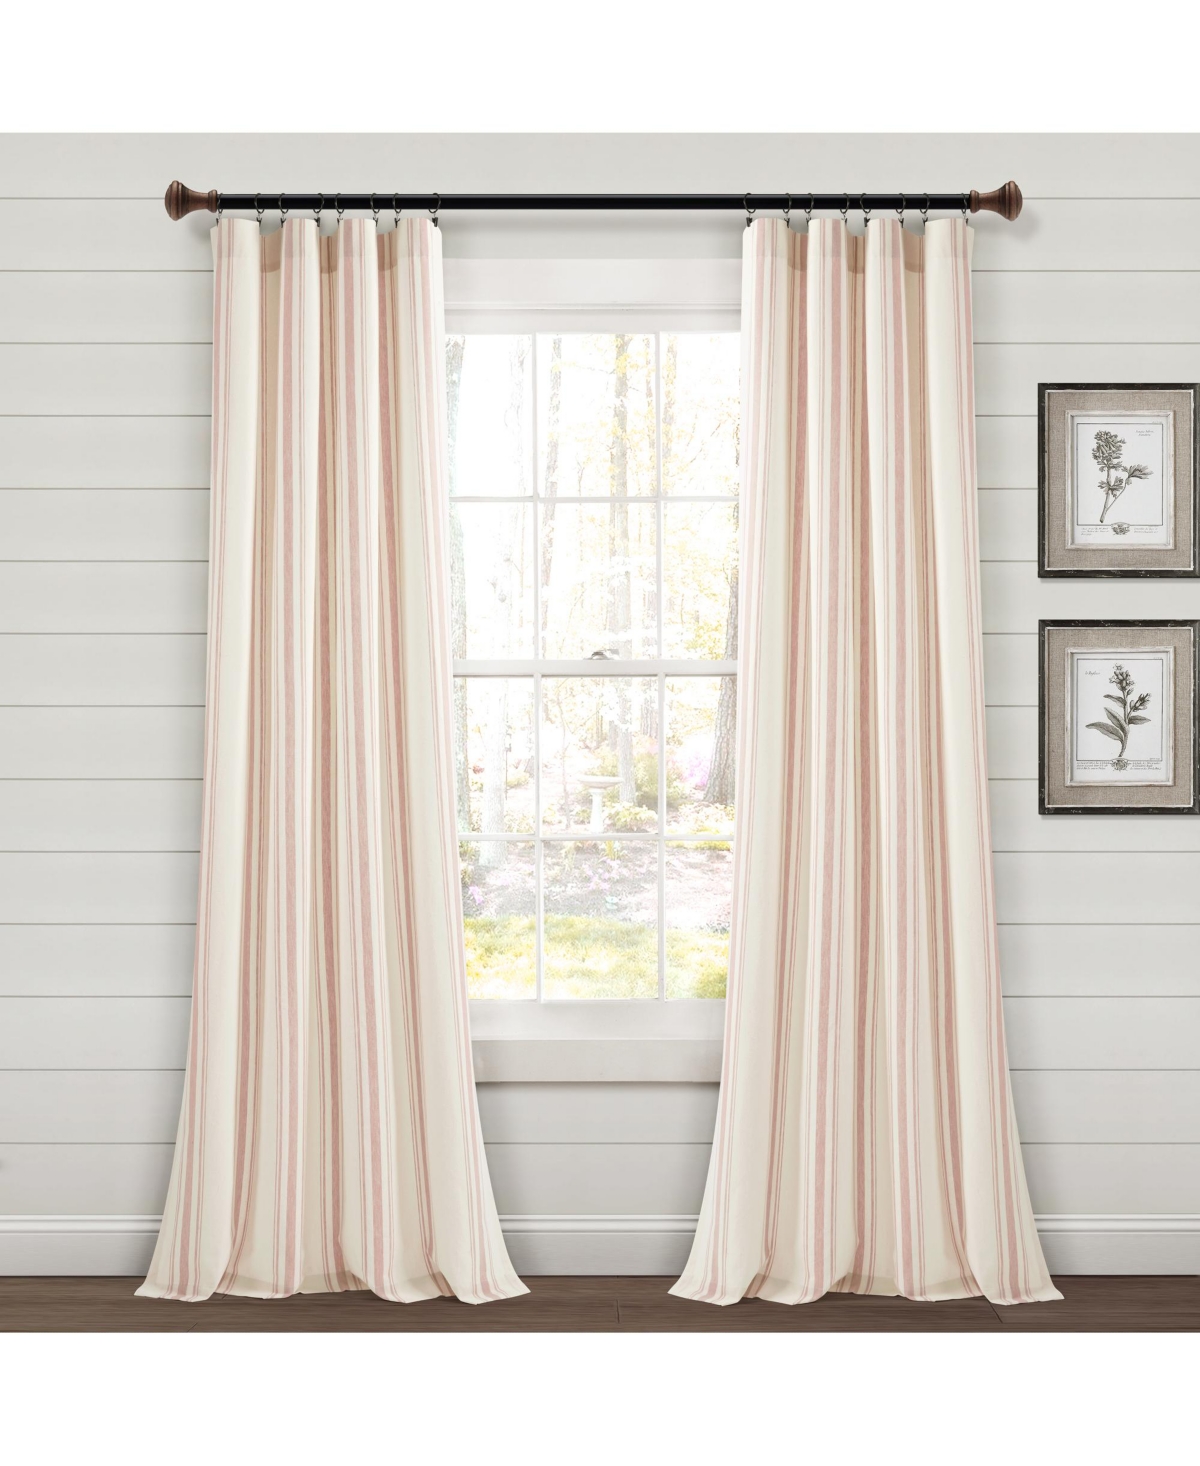 Lush Decor Farmhouse Stripe Yarn Dyed Eco-friendly Recycled Cotton Window Curtain Panels In Pink